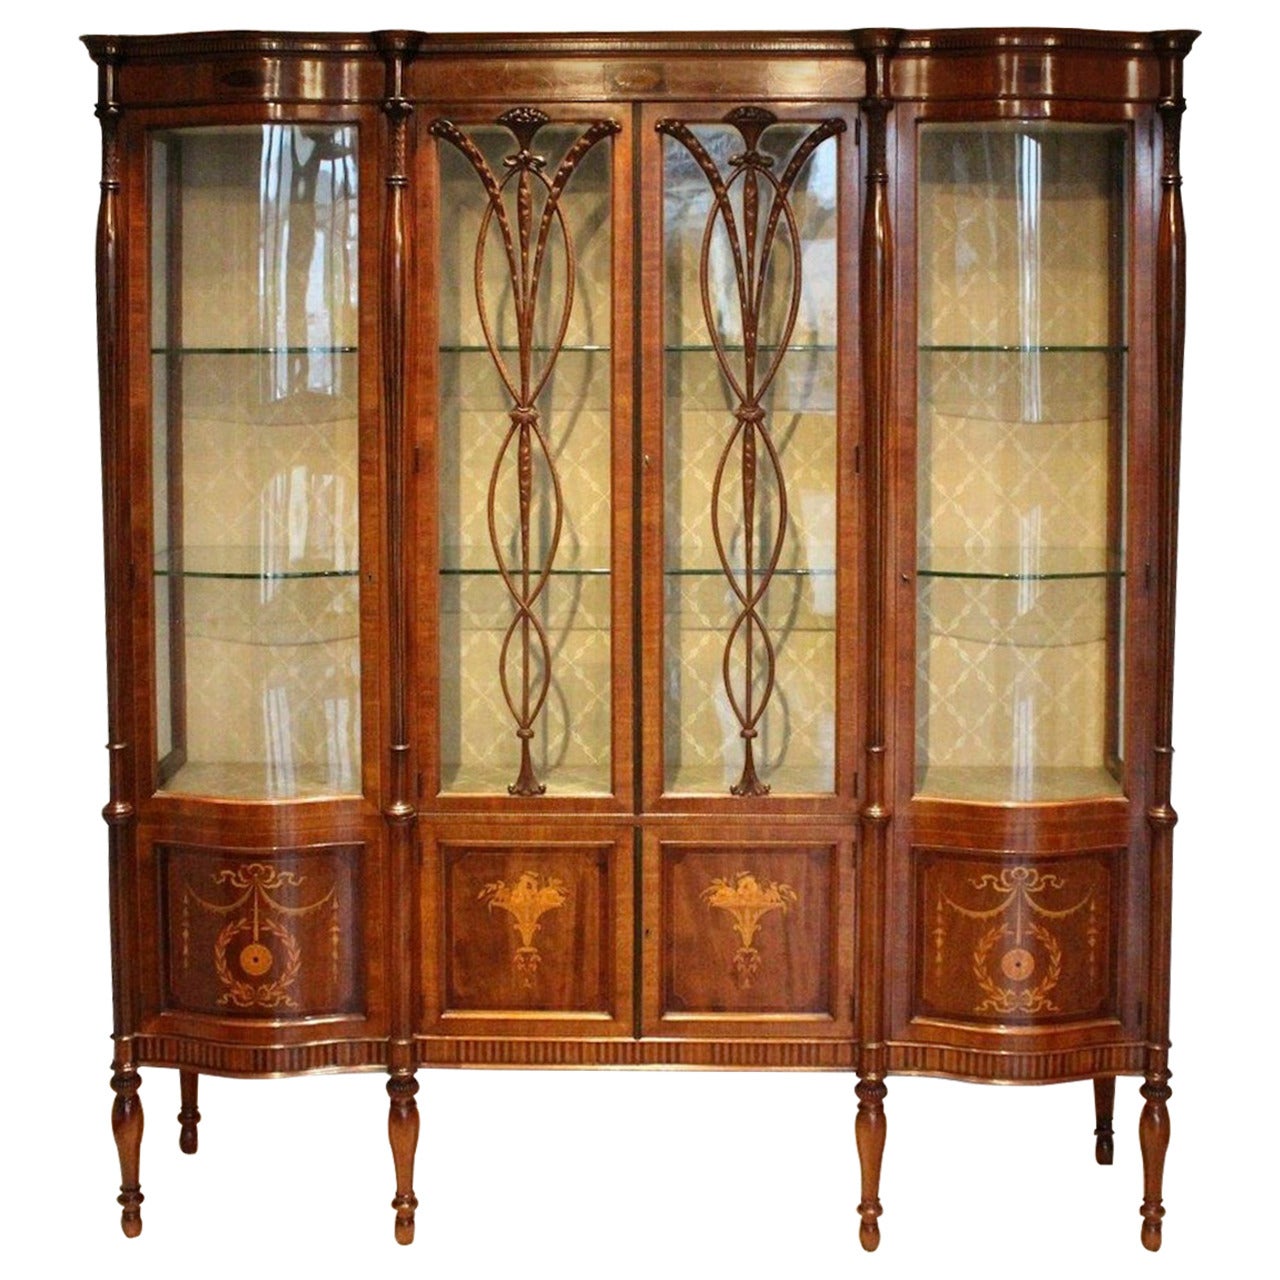 Fine Quality Mahogany Edwardian Period Antique Display Cabinet by Maple & Co